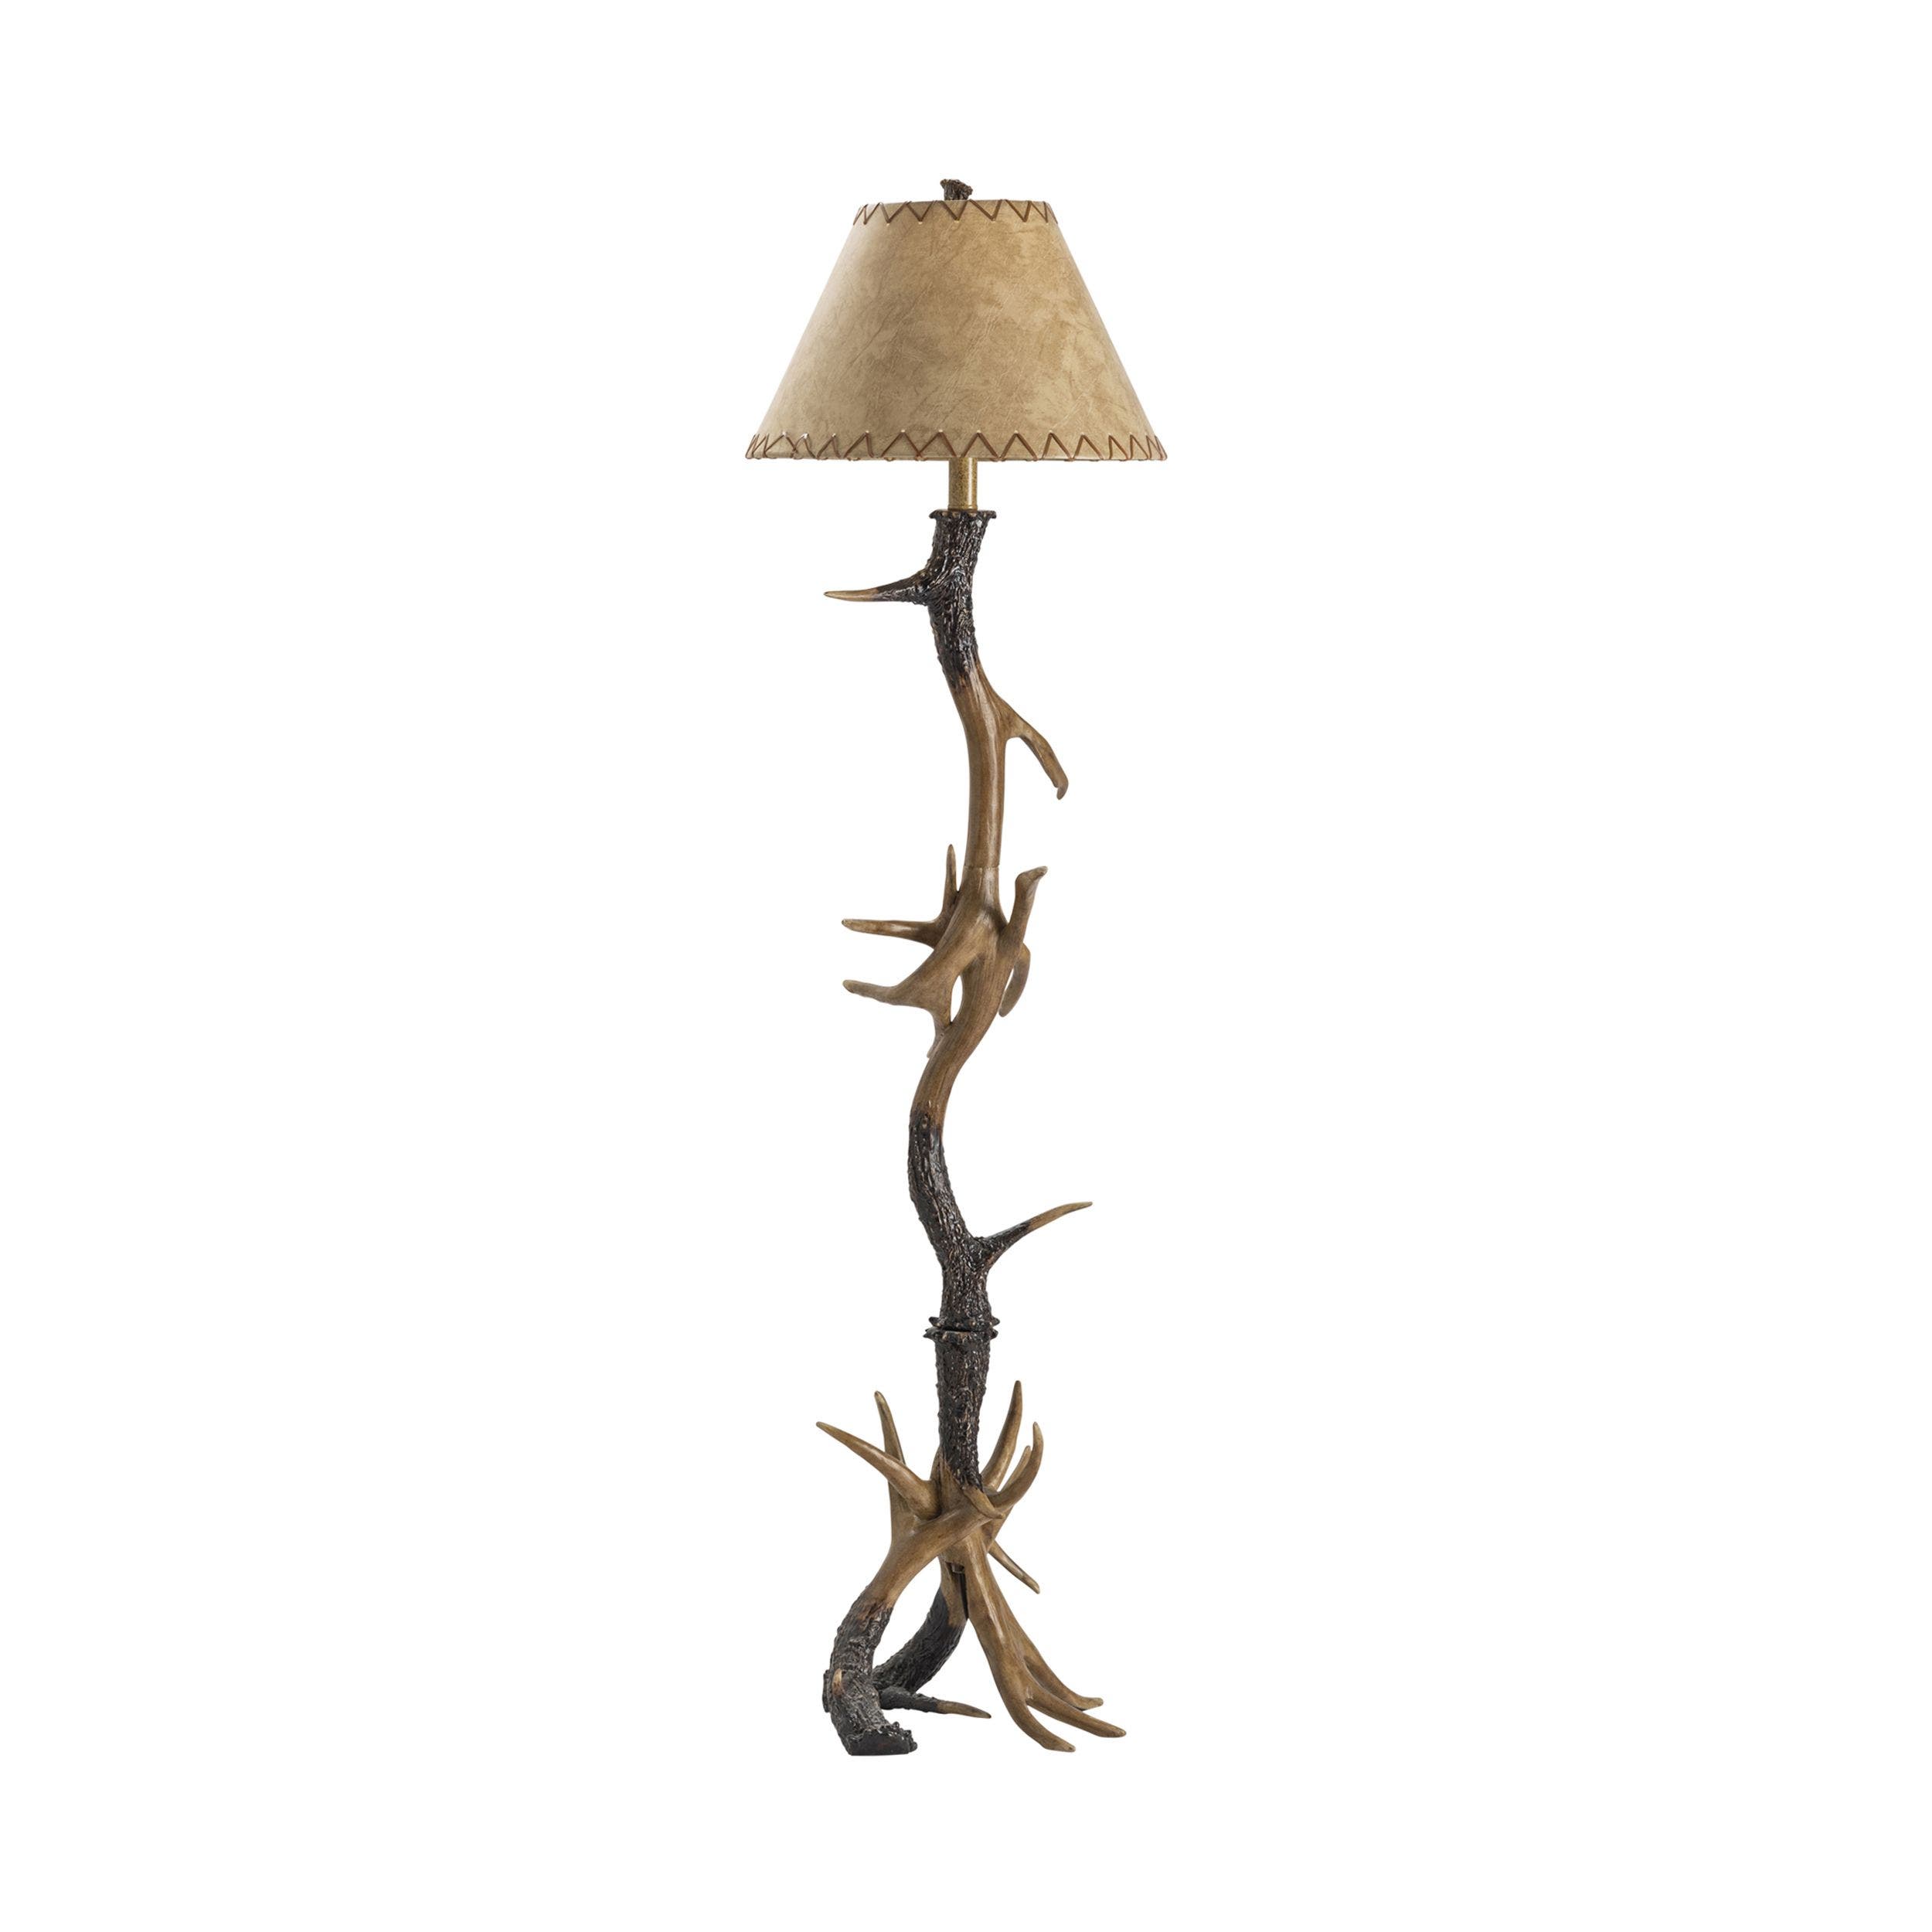 Billings Antler Table Lamp - Crestview Collection